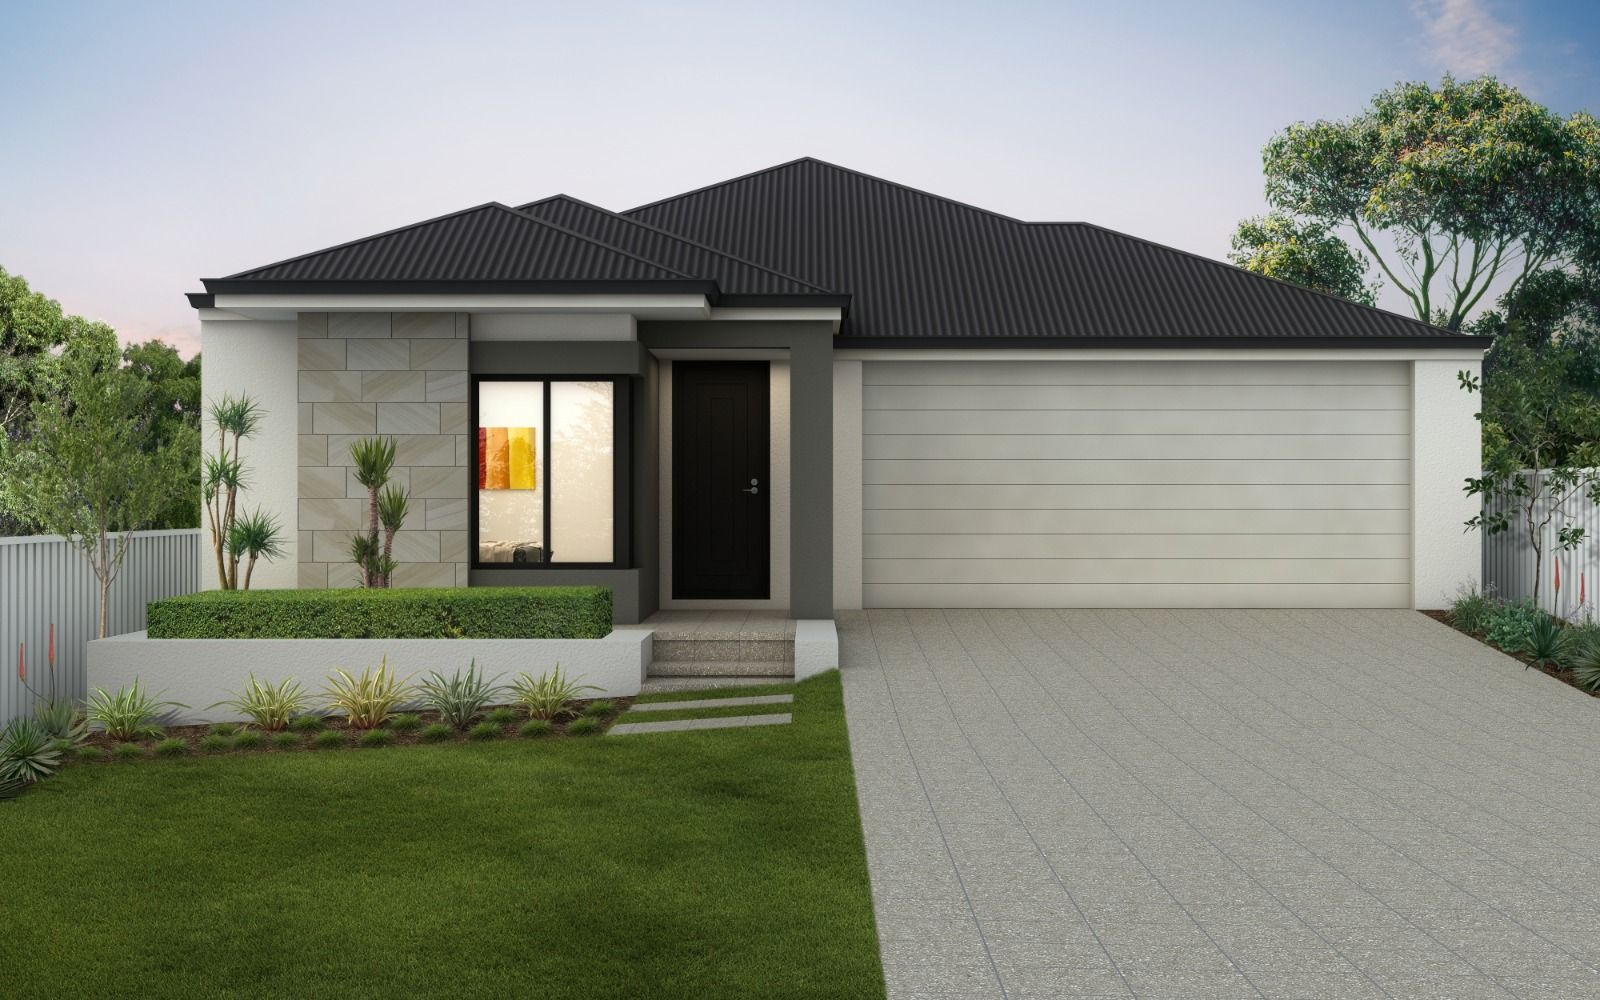 3 bedrooms New House & Land in  GOLDEN BAY WA, 6174